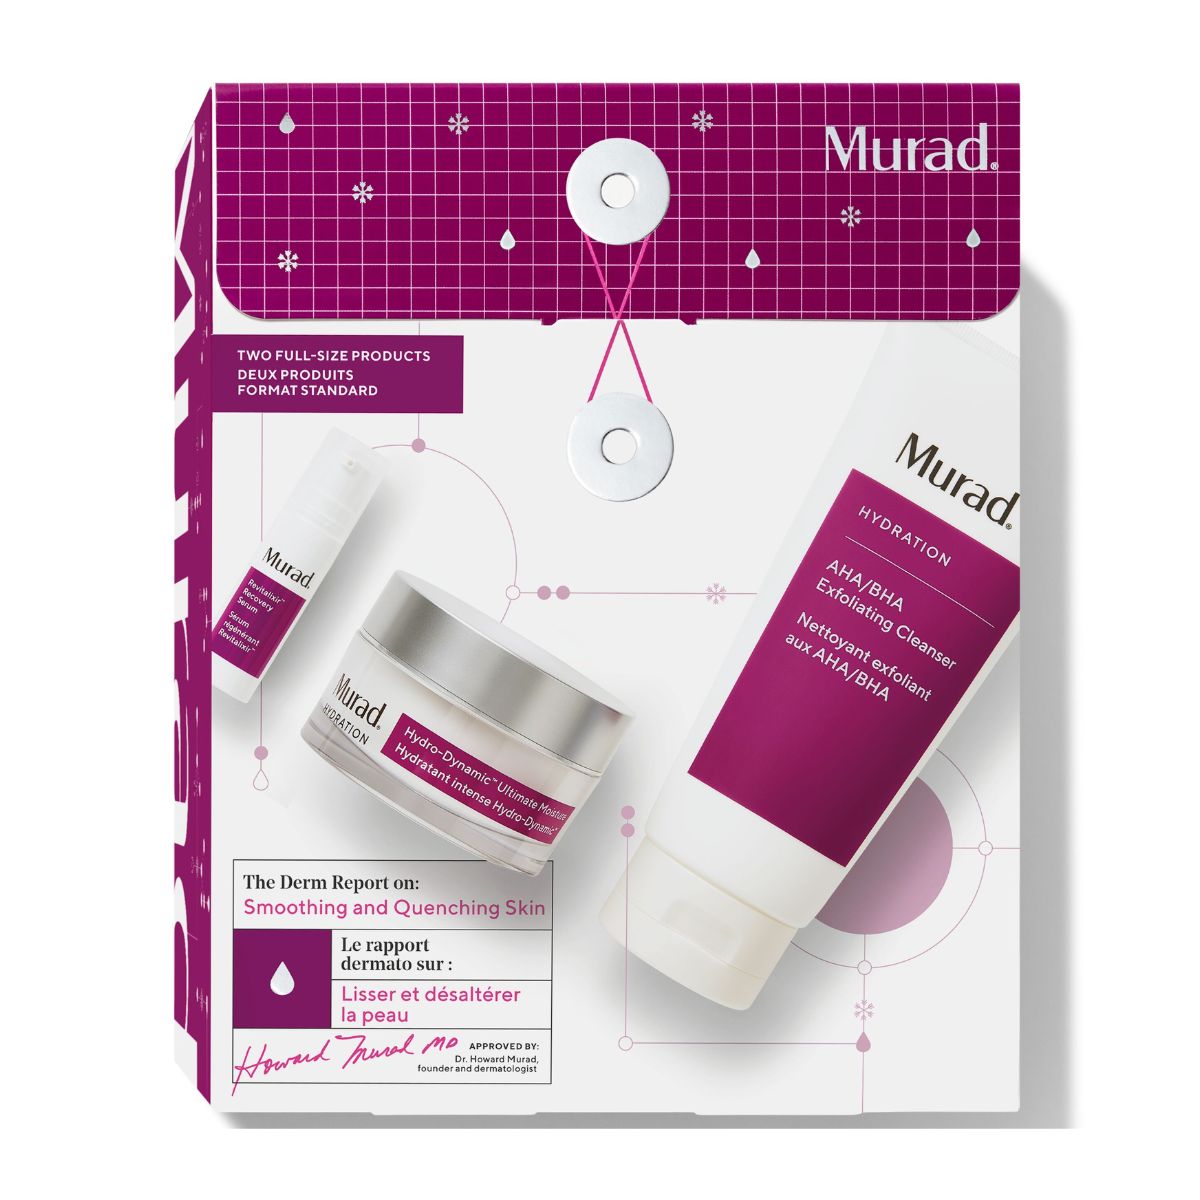 Murad The Derm Report on: Smoothing and Quenching Skin.